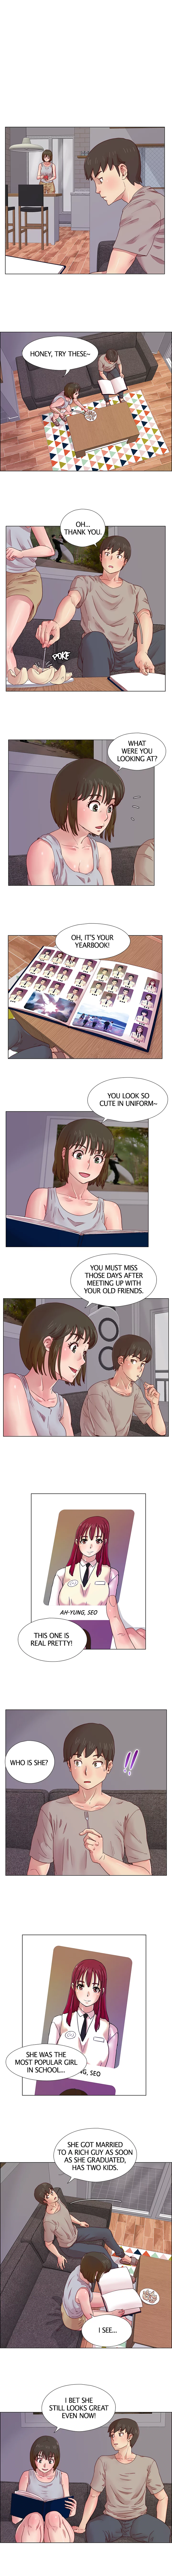 Partner Roulette - Chapter 7 Page 3